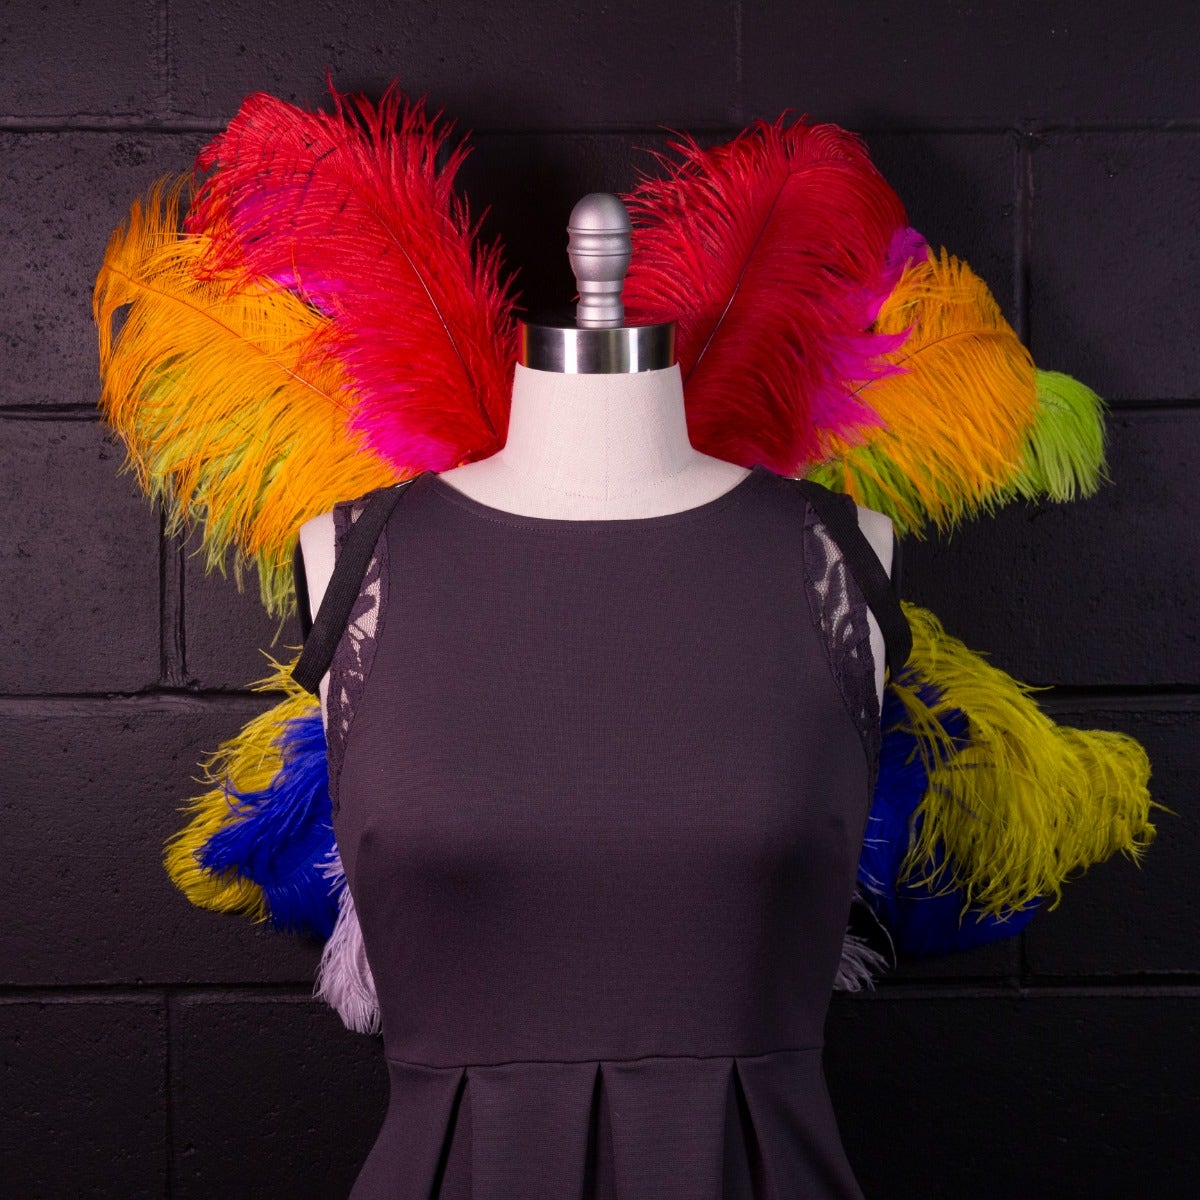 Medium Upcycled Ostrich Feather Costume Wings - Rainbow